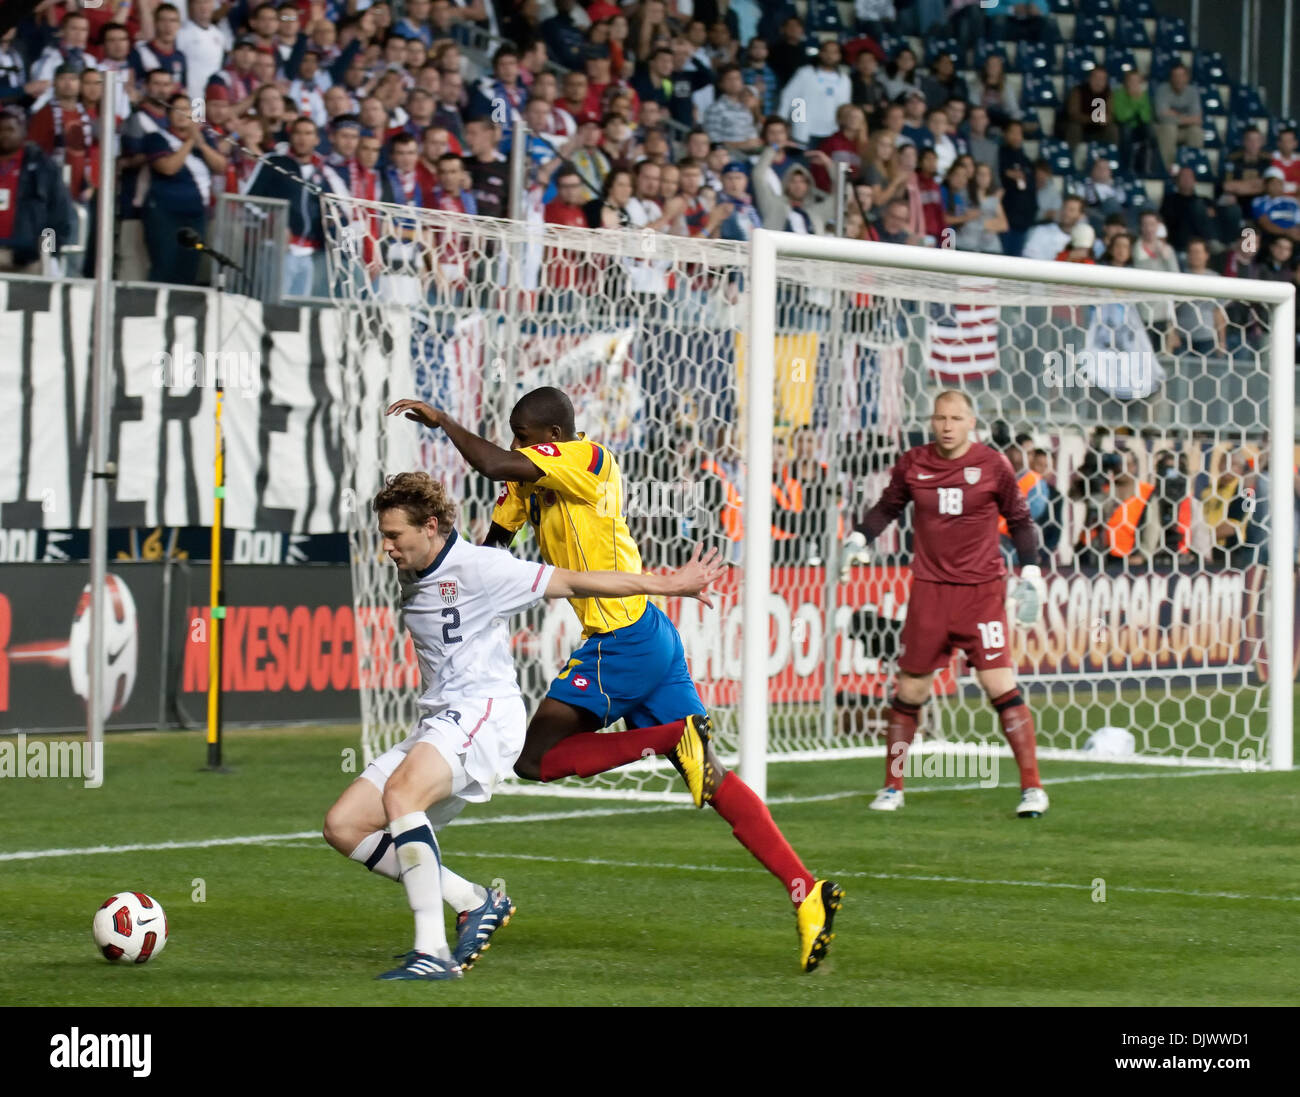 Oct 12, 2010 - Chester, Pennsylvania, U.S. - MLS Soccer - USA'S JONATHAN SPECTOR blocks an attempt on goal by VICTOR IBARBO. The USA and Colombia played an International Friendly match at PPL Park in Chester. (Credit Image: © Ricky Fitchett/ZUMApress.com) Stock Photo